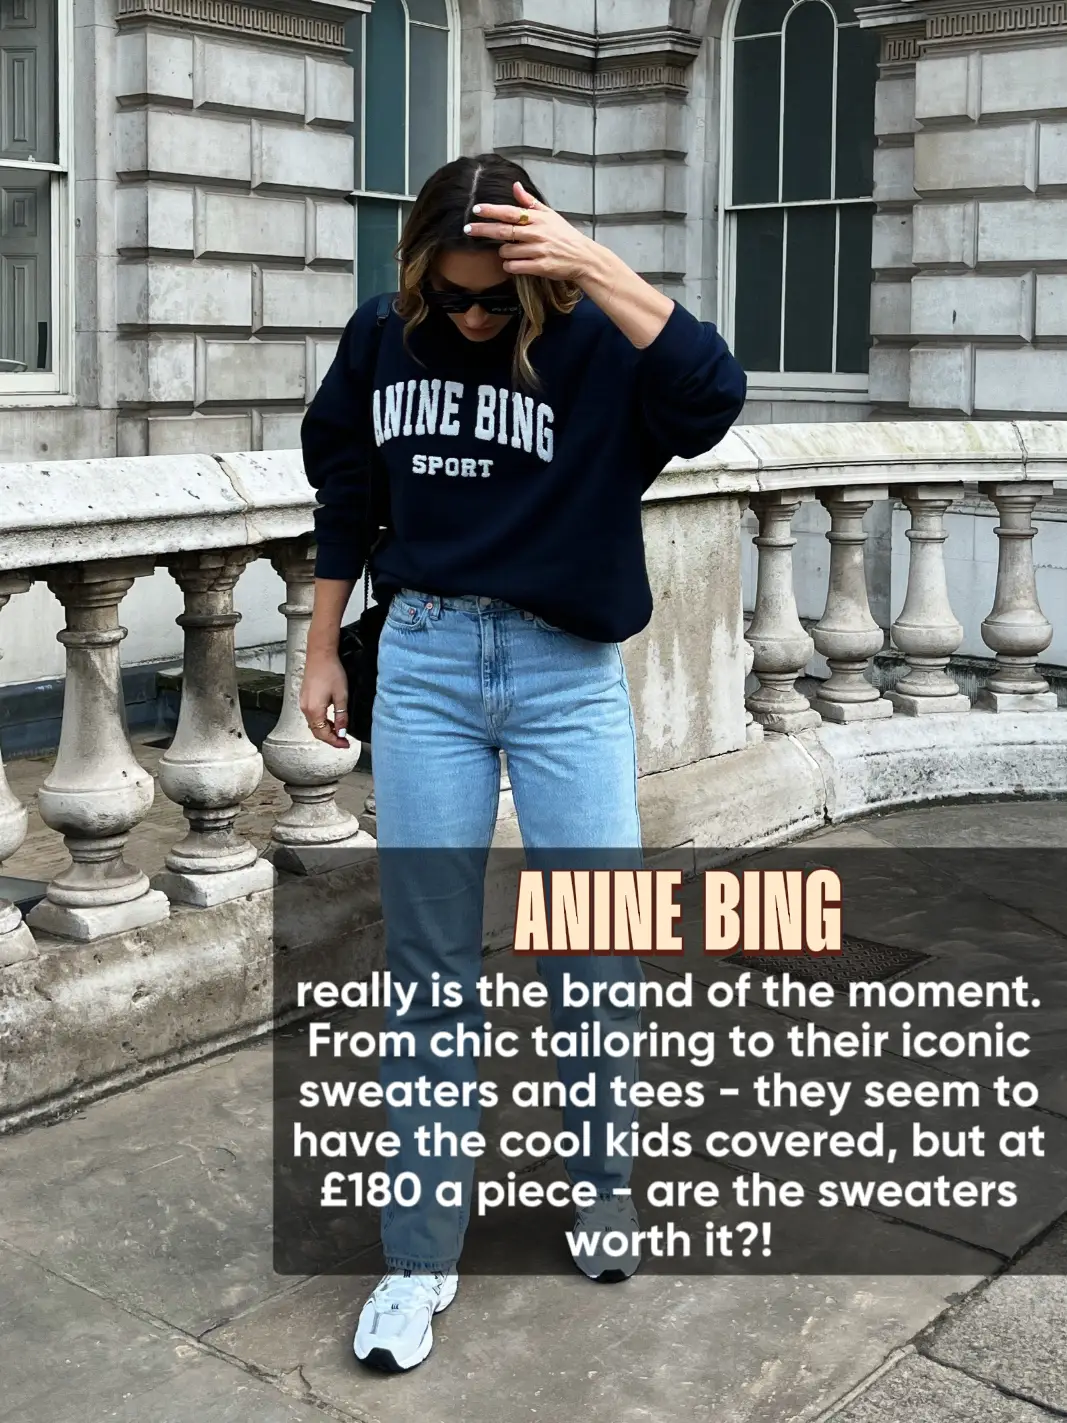 ANINE BING: THE BRAND I CAN'T GET ENOUGH OF RIGHT NOW, CHIC TALK